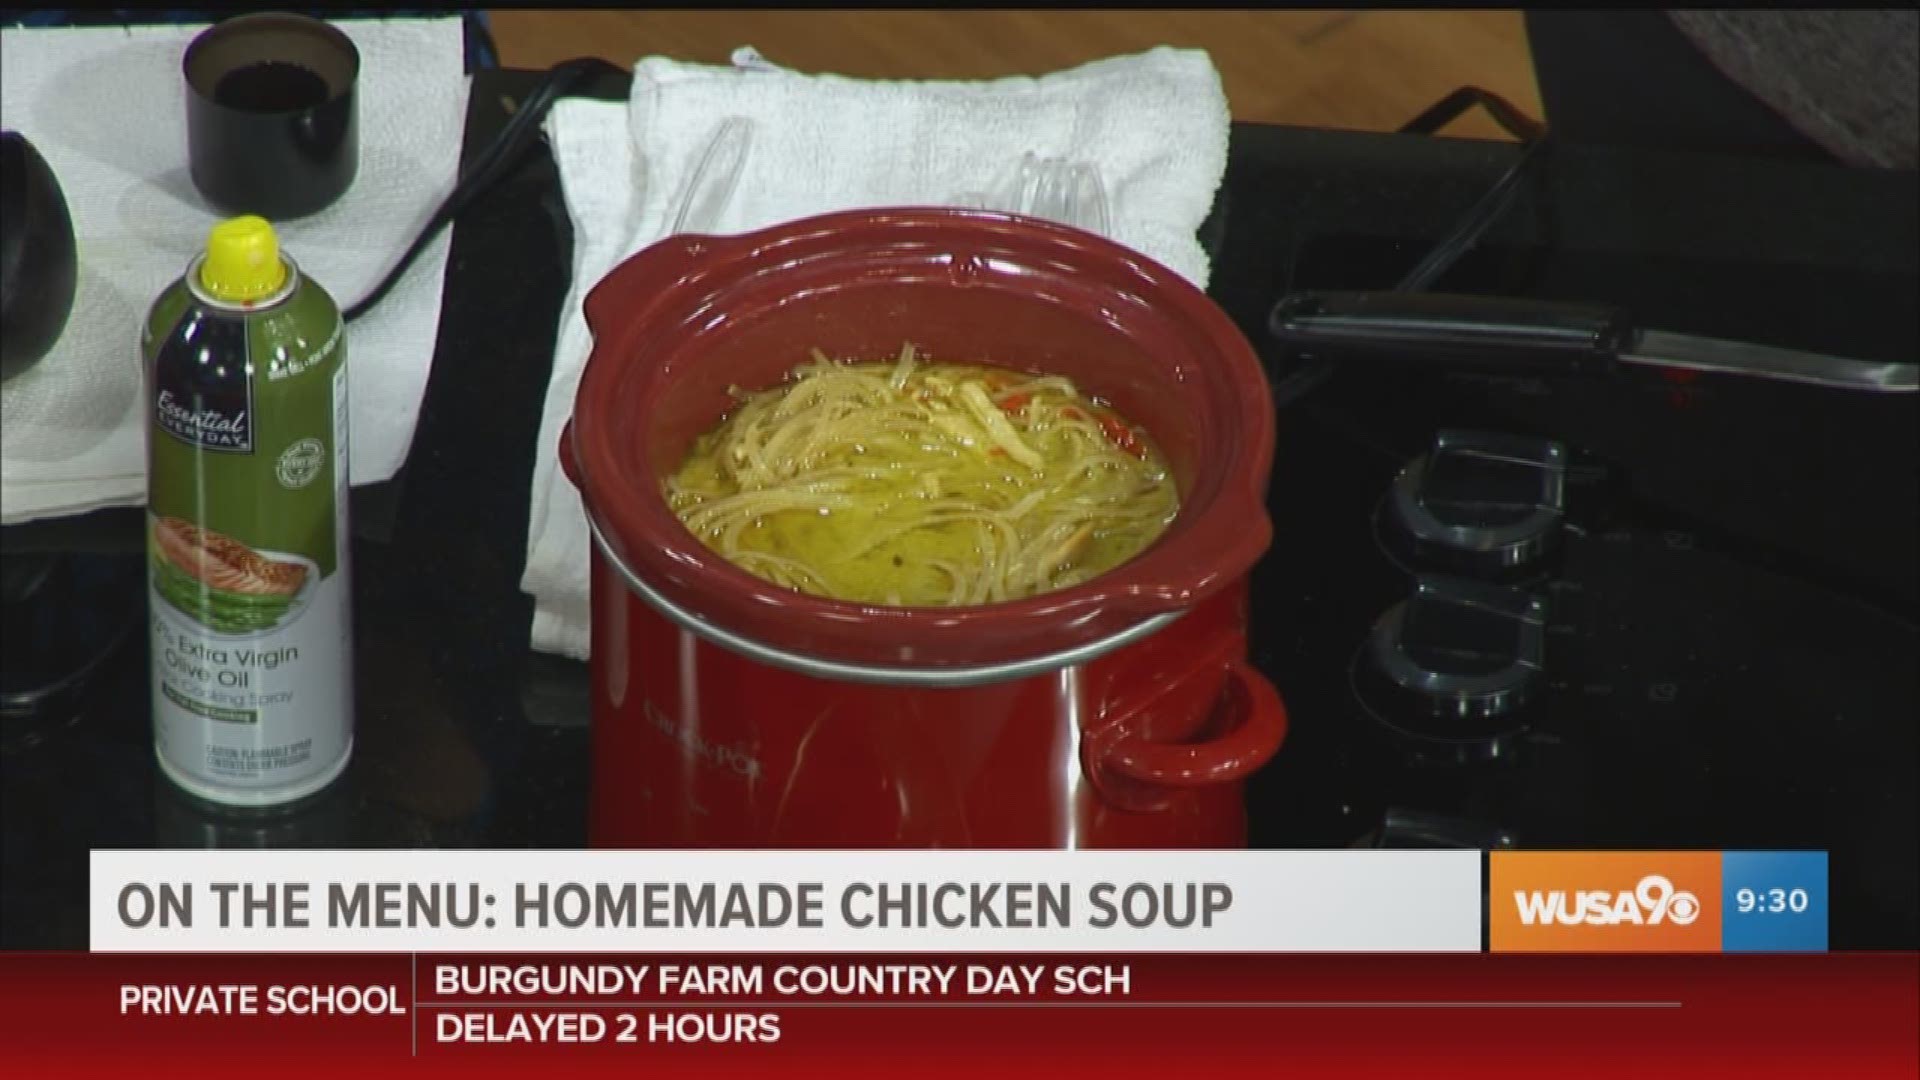 Need some chicken noodle soup to help you get through cold and flu season? Author and chef EK Ray shows you how to make low sodium, homemade chicken noodle 4 different ways.